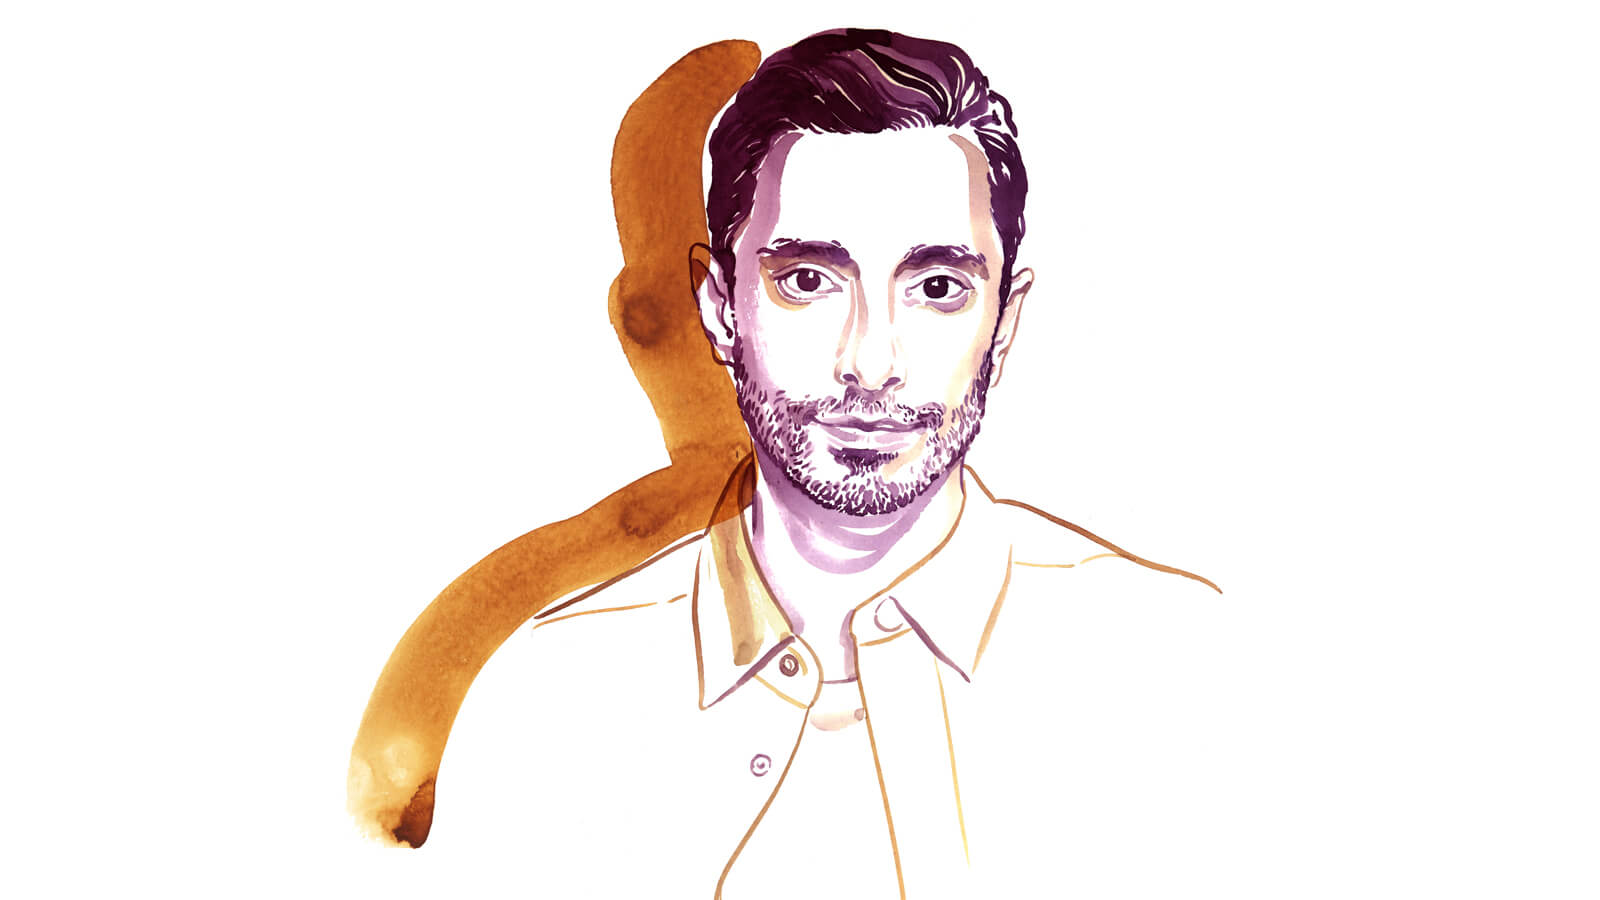 Illustrated portrait of actor and director Riz Ahmed